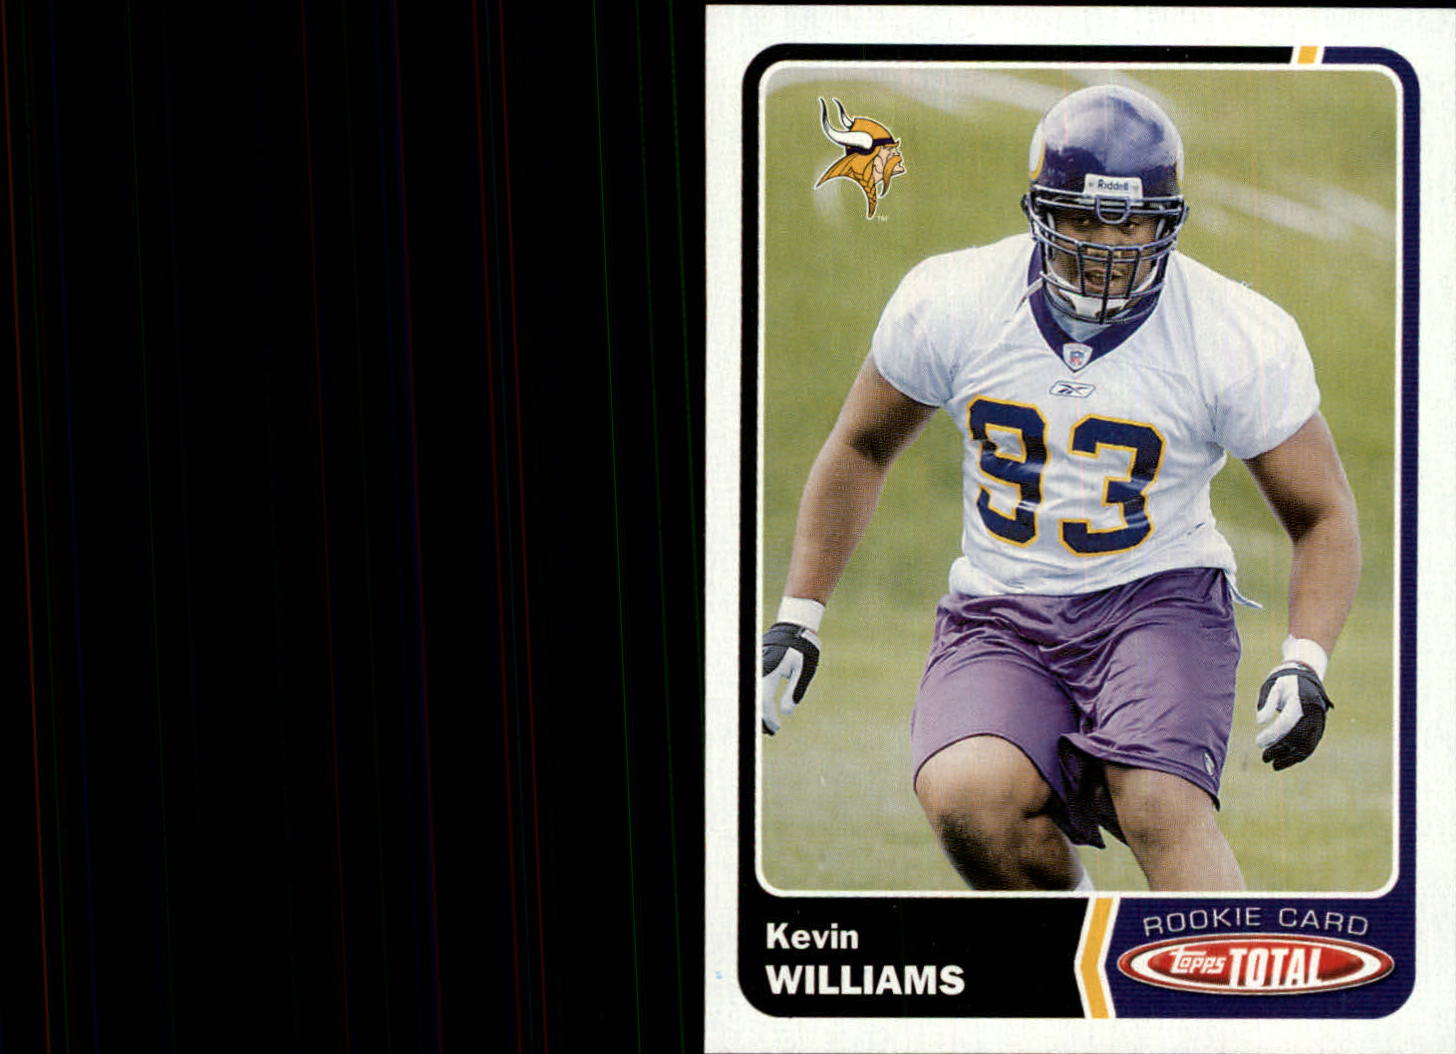 2003 Topps Total #518 Kevin Williams RC